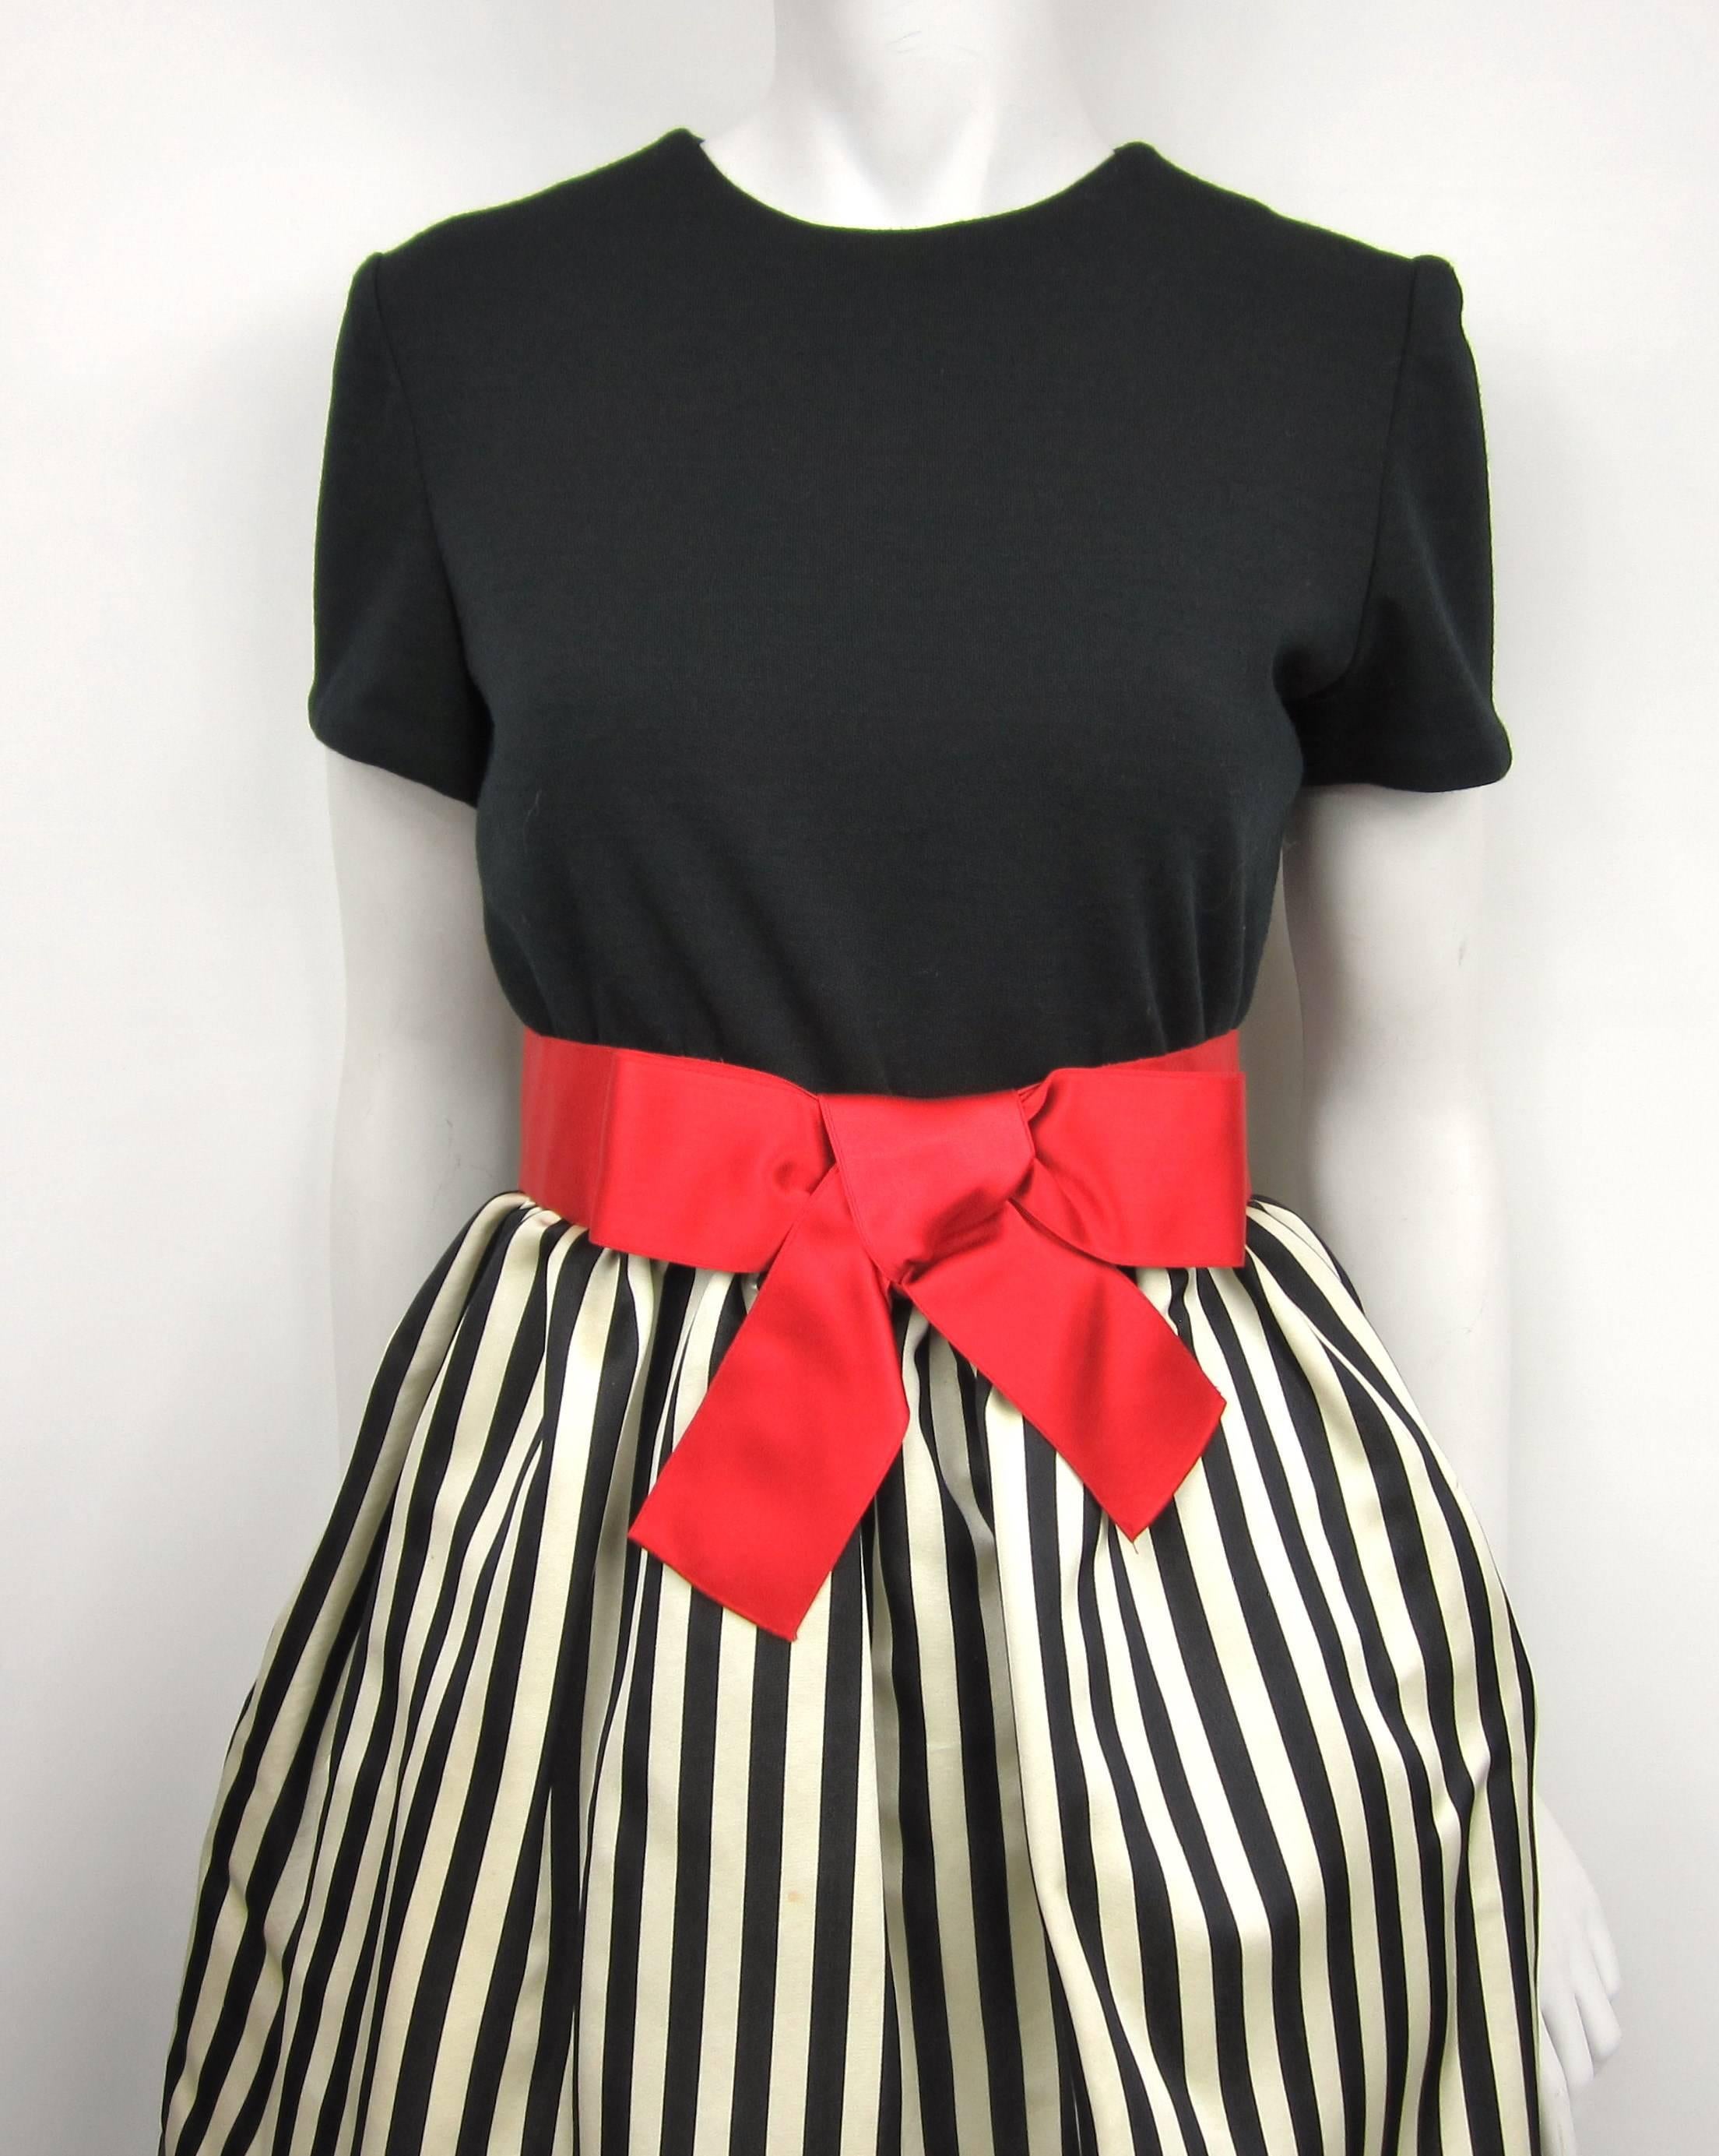 Fantastic Bill Blass dress. Featuring a crinoline under skirt with a Attached red silk bow belt. black bodice with zippered back. It has slit pockets in the skirt!! . Measuring Up to 36 inch bust----Up to 27 inch waist ---Hips open ---37.5 inch down